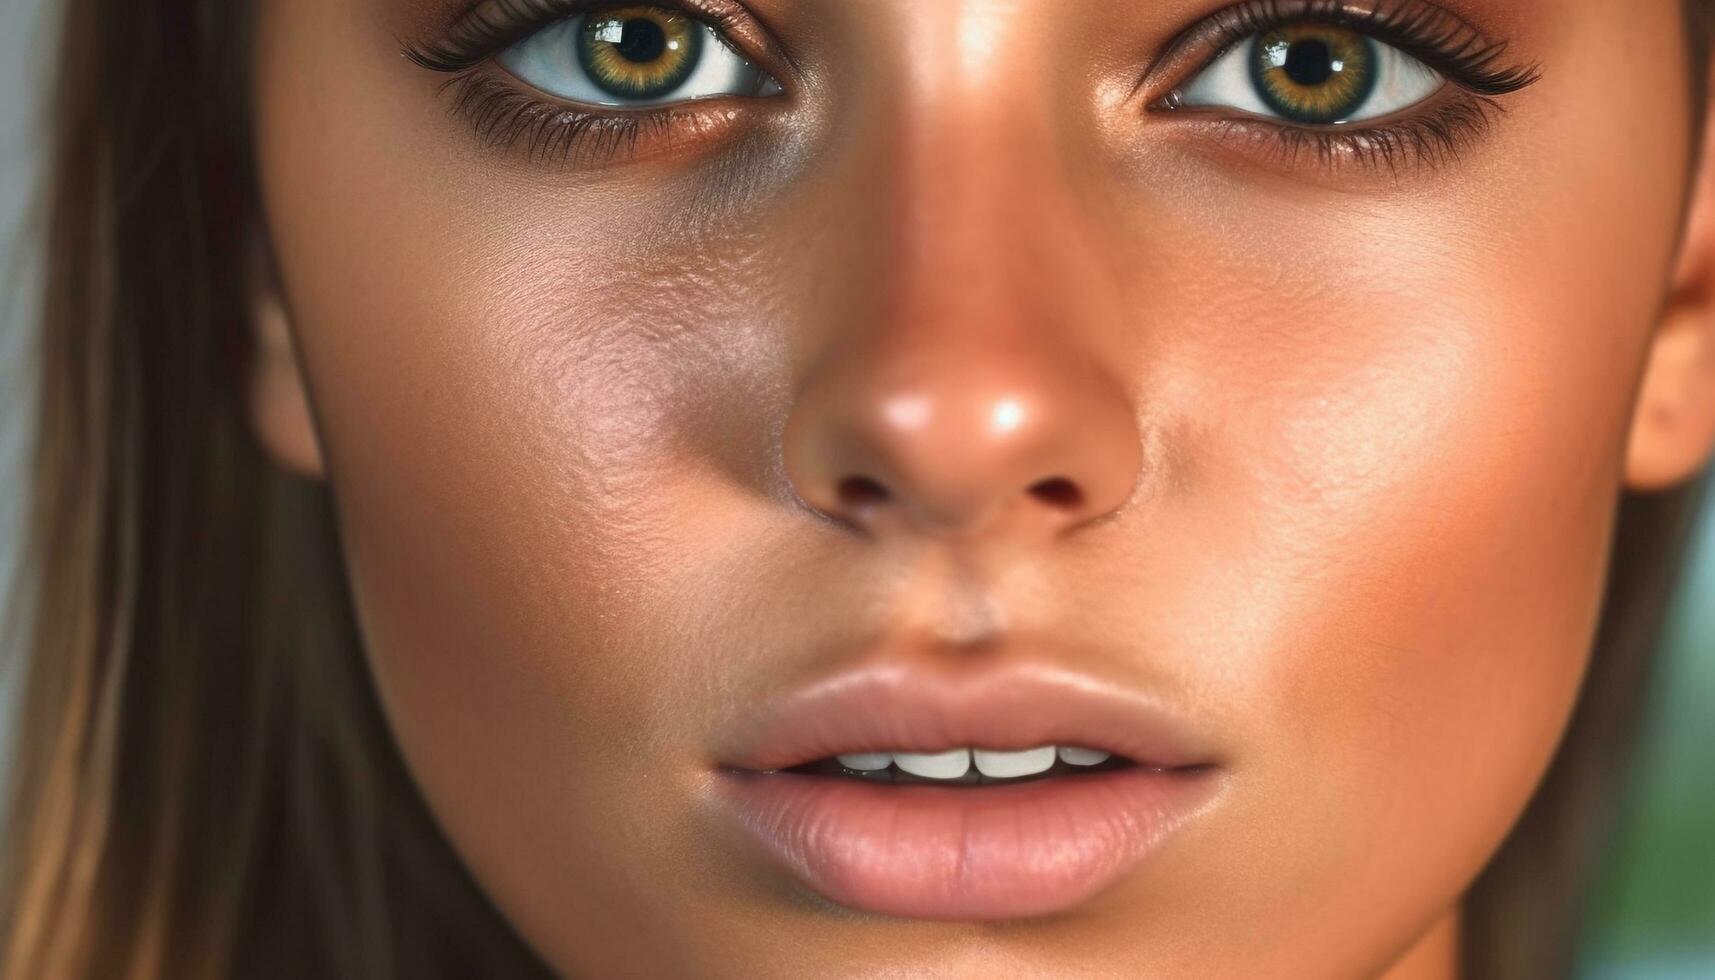 Fresh faced beauty exudes confidence and sensuality in close up portrait generated by AI photo